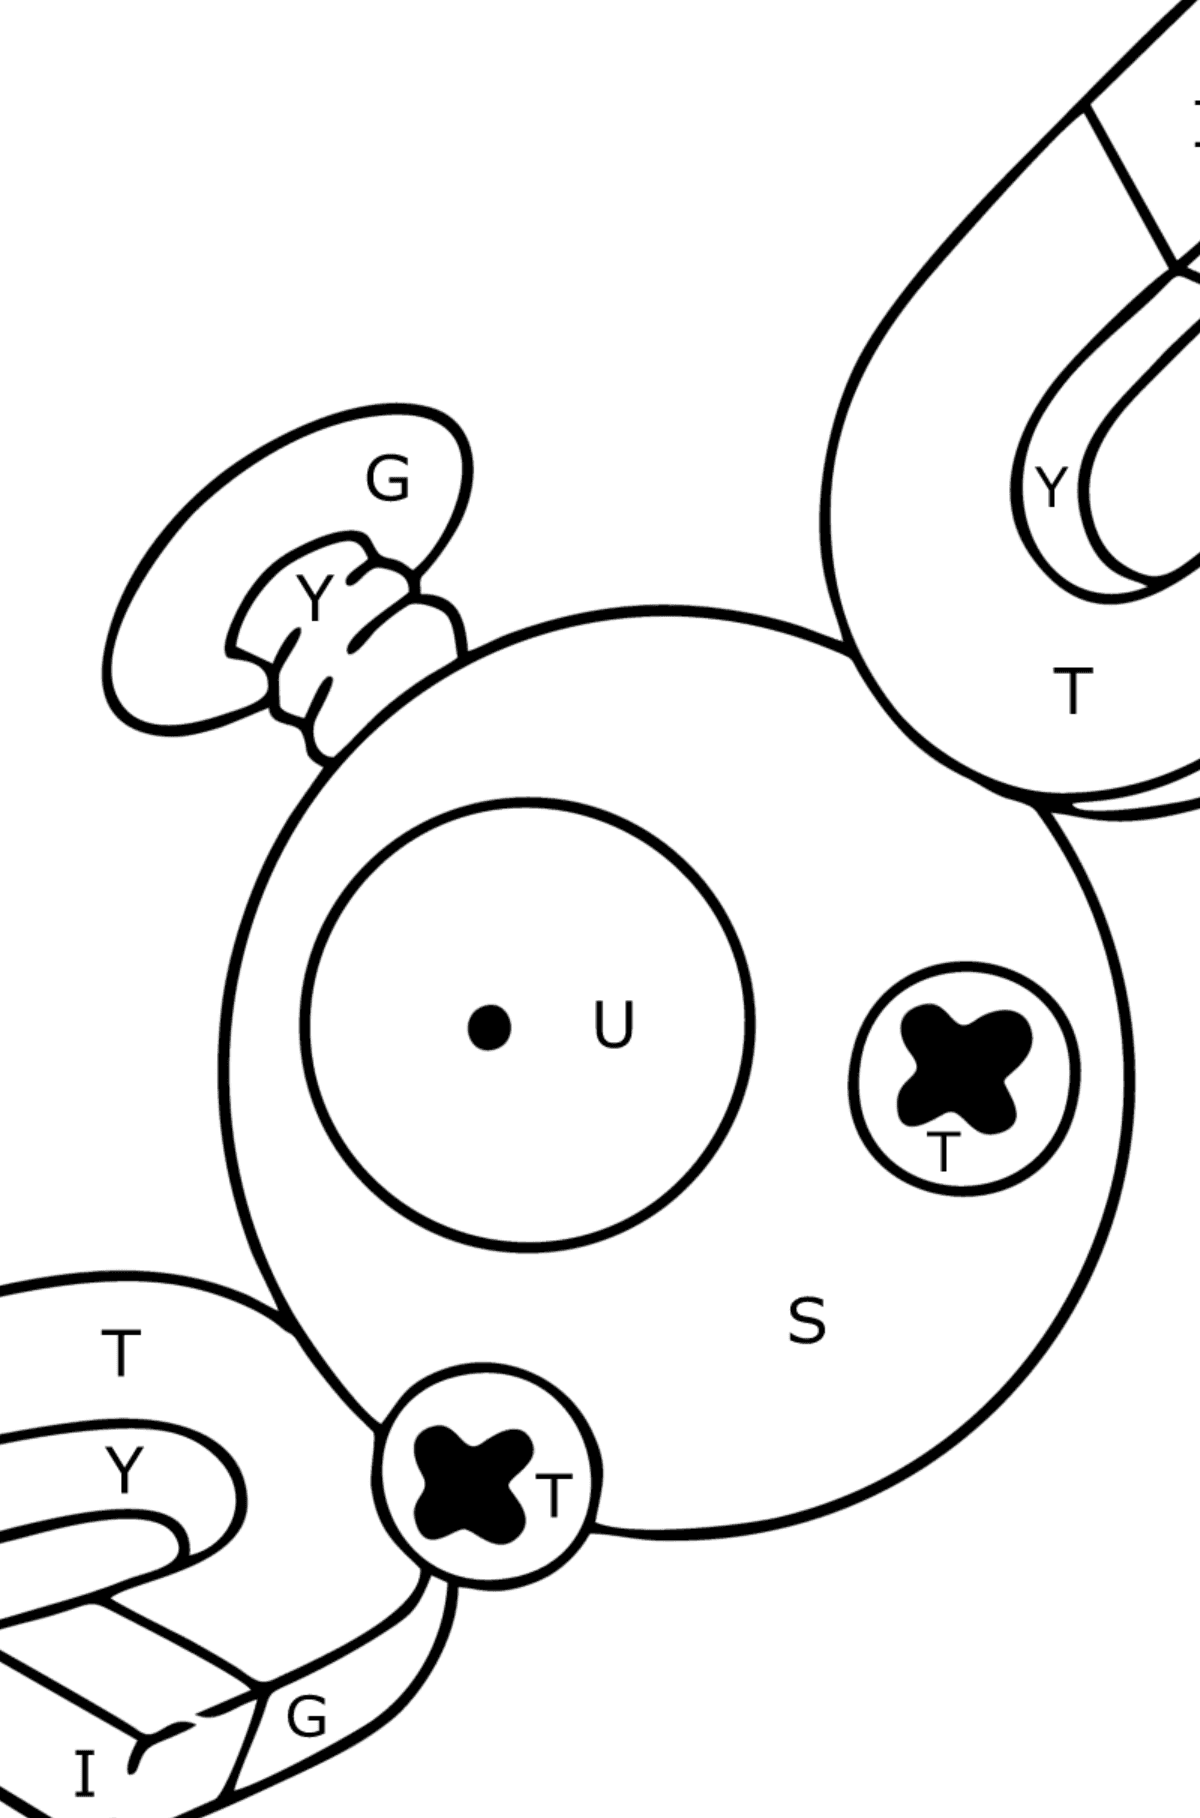 Coloring page Pokémon Go Magnemite - Coloring by Letters for Kids